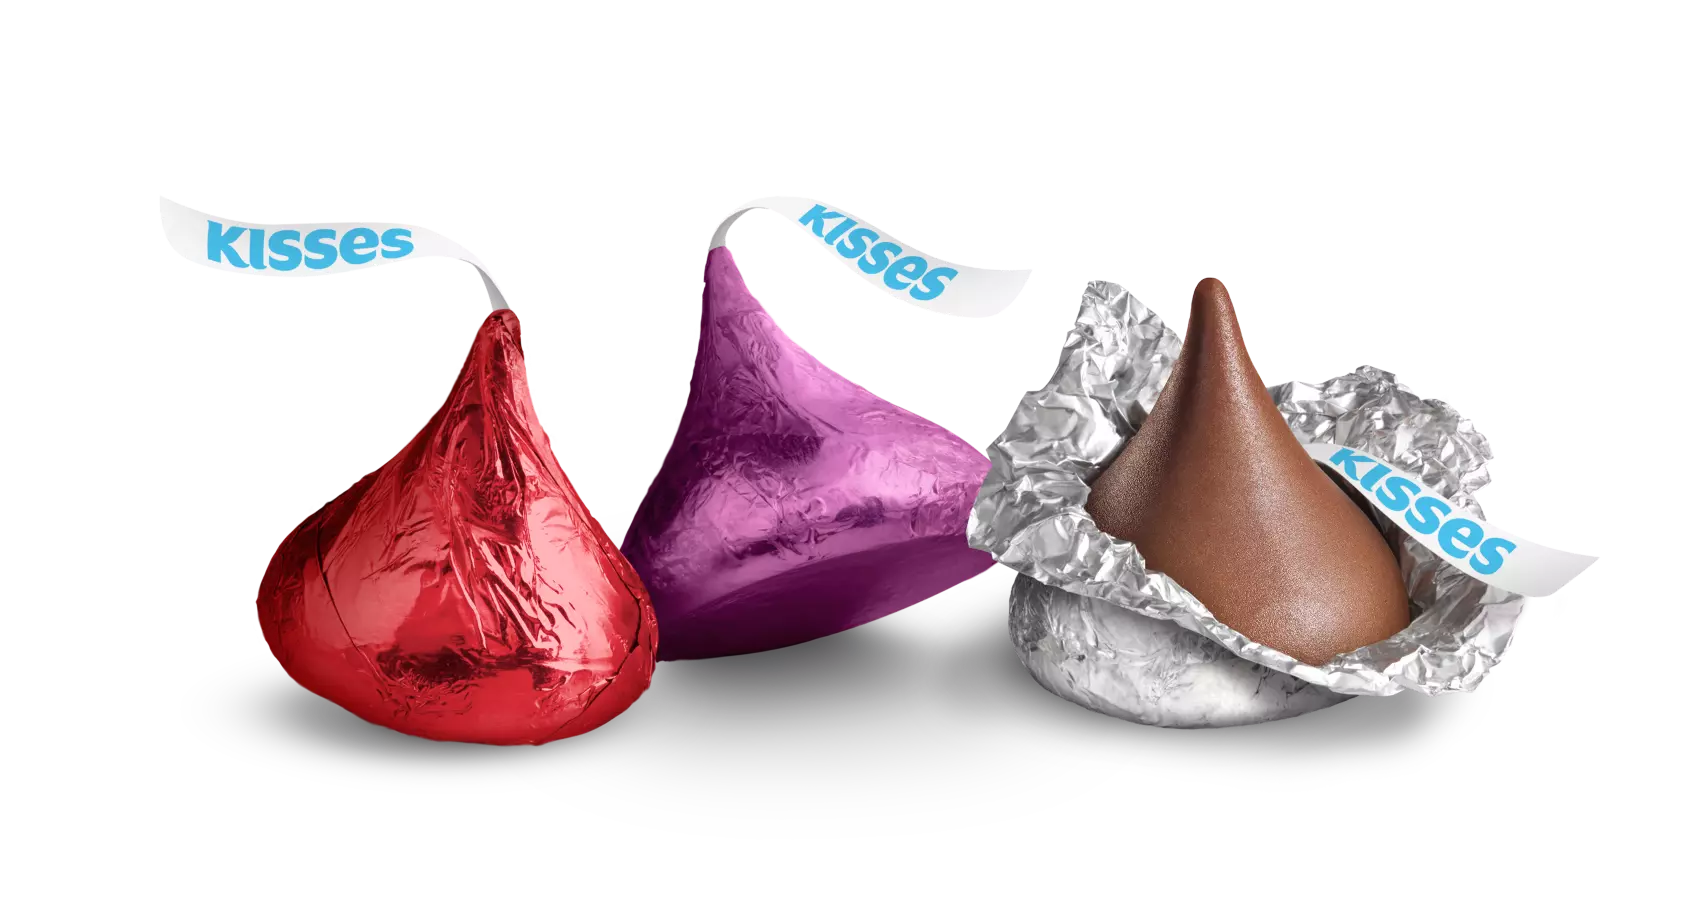 HERSHEY'S KISSES Valentine's Milk Chocolate Candy, 17 oz bag - Out of Package